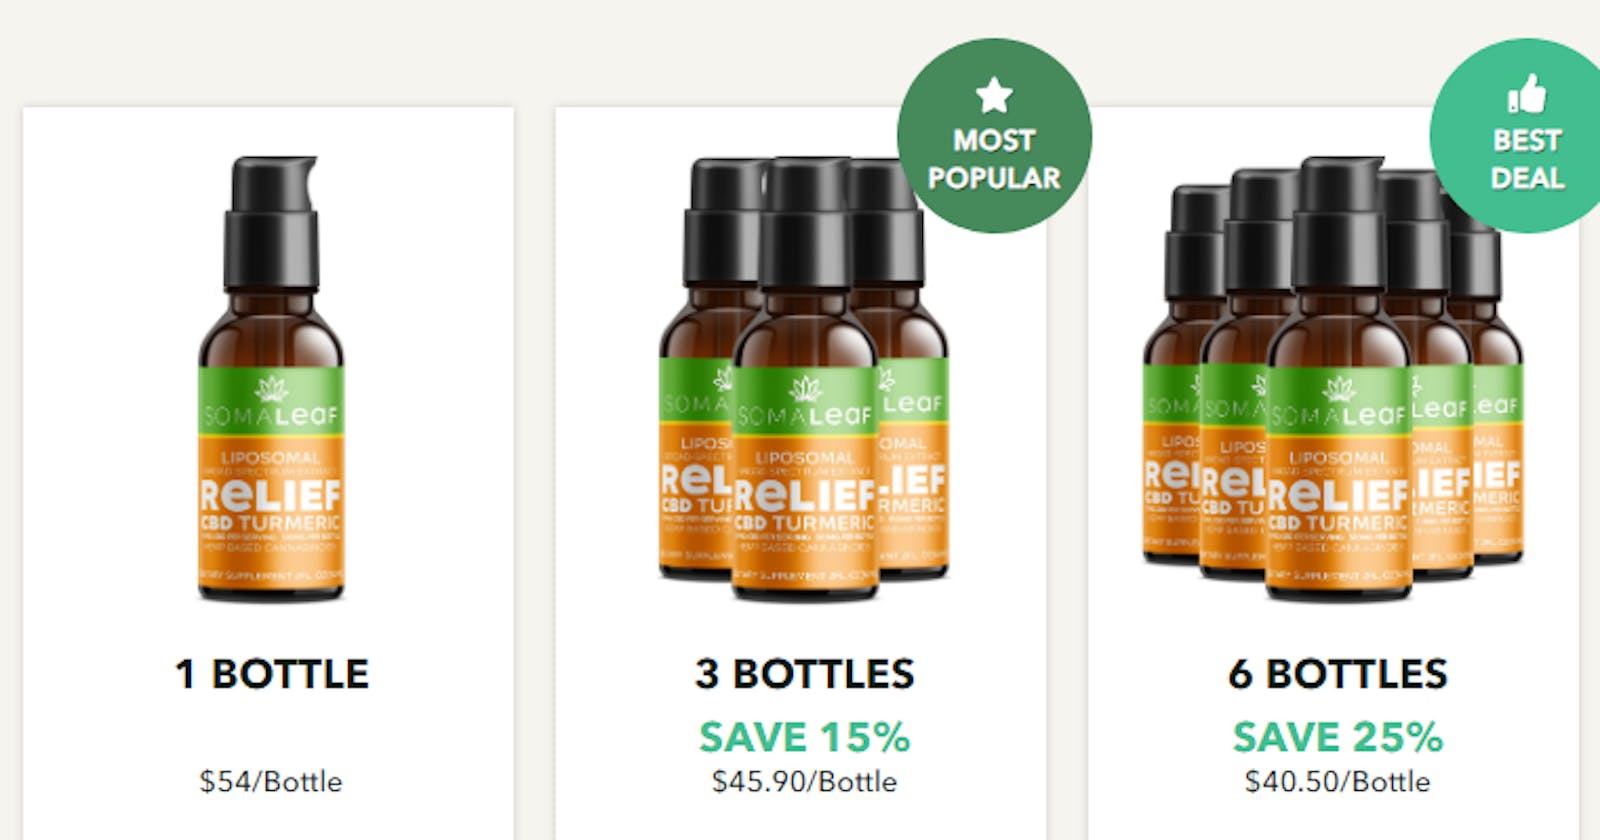 Somaleaf Relief CBD Turmeric Reviews **NEW OFFER** Ease Pain, And Improve Sleep!